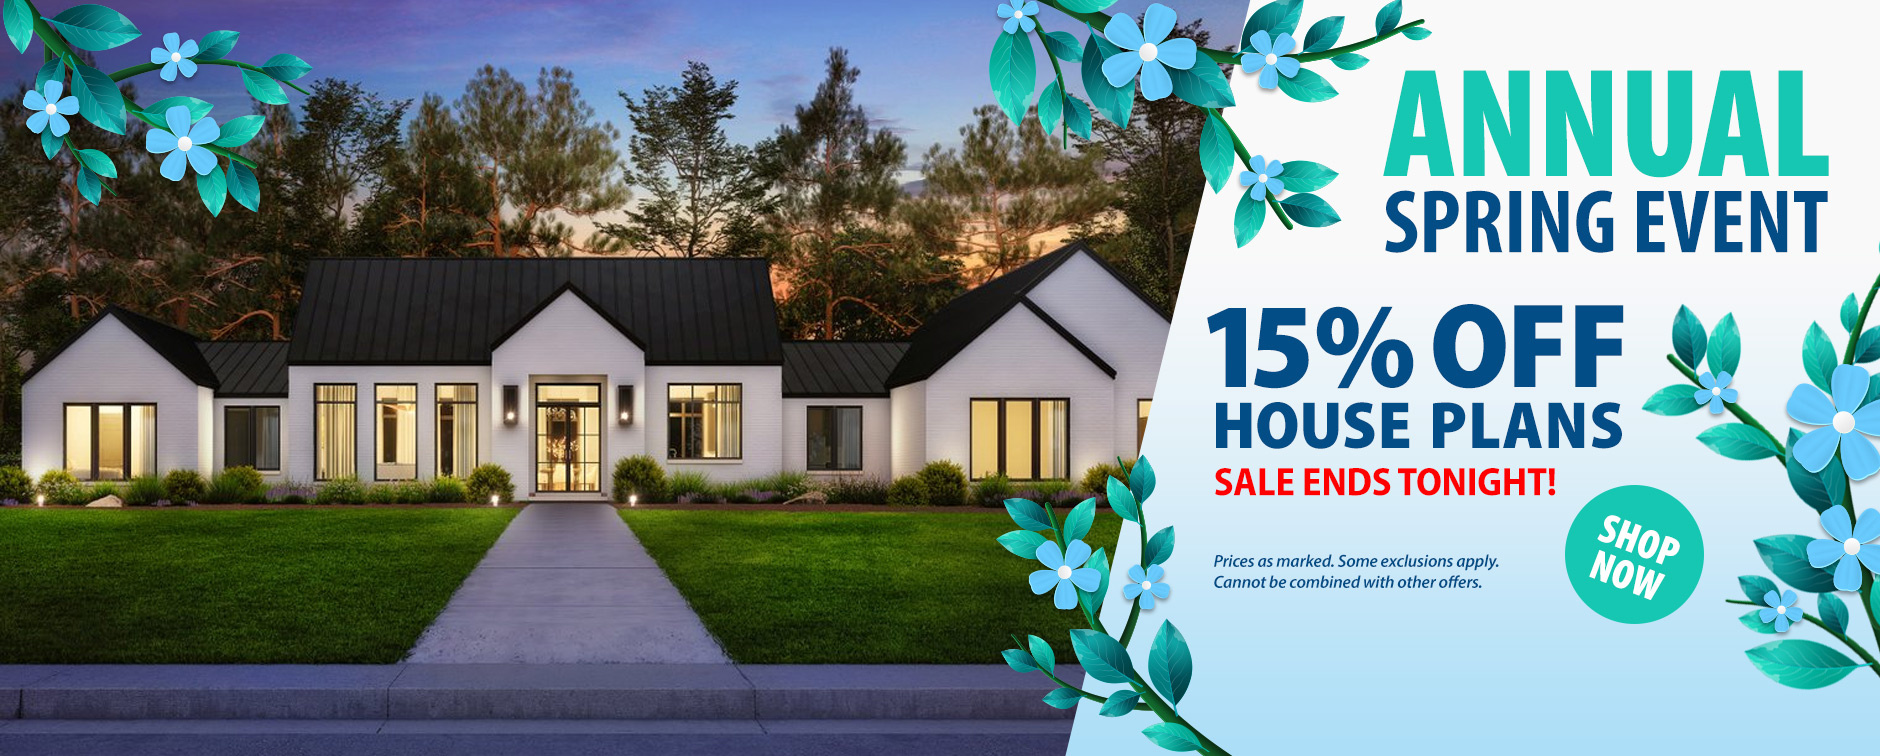 Sale Ends Tonight: Shop Now & Take 15% Off House Plans